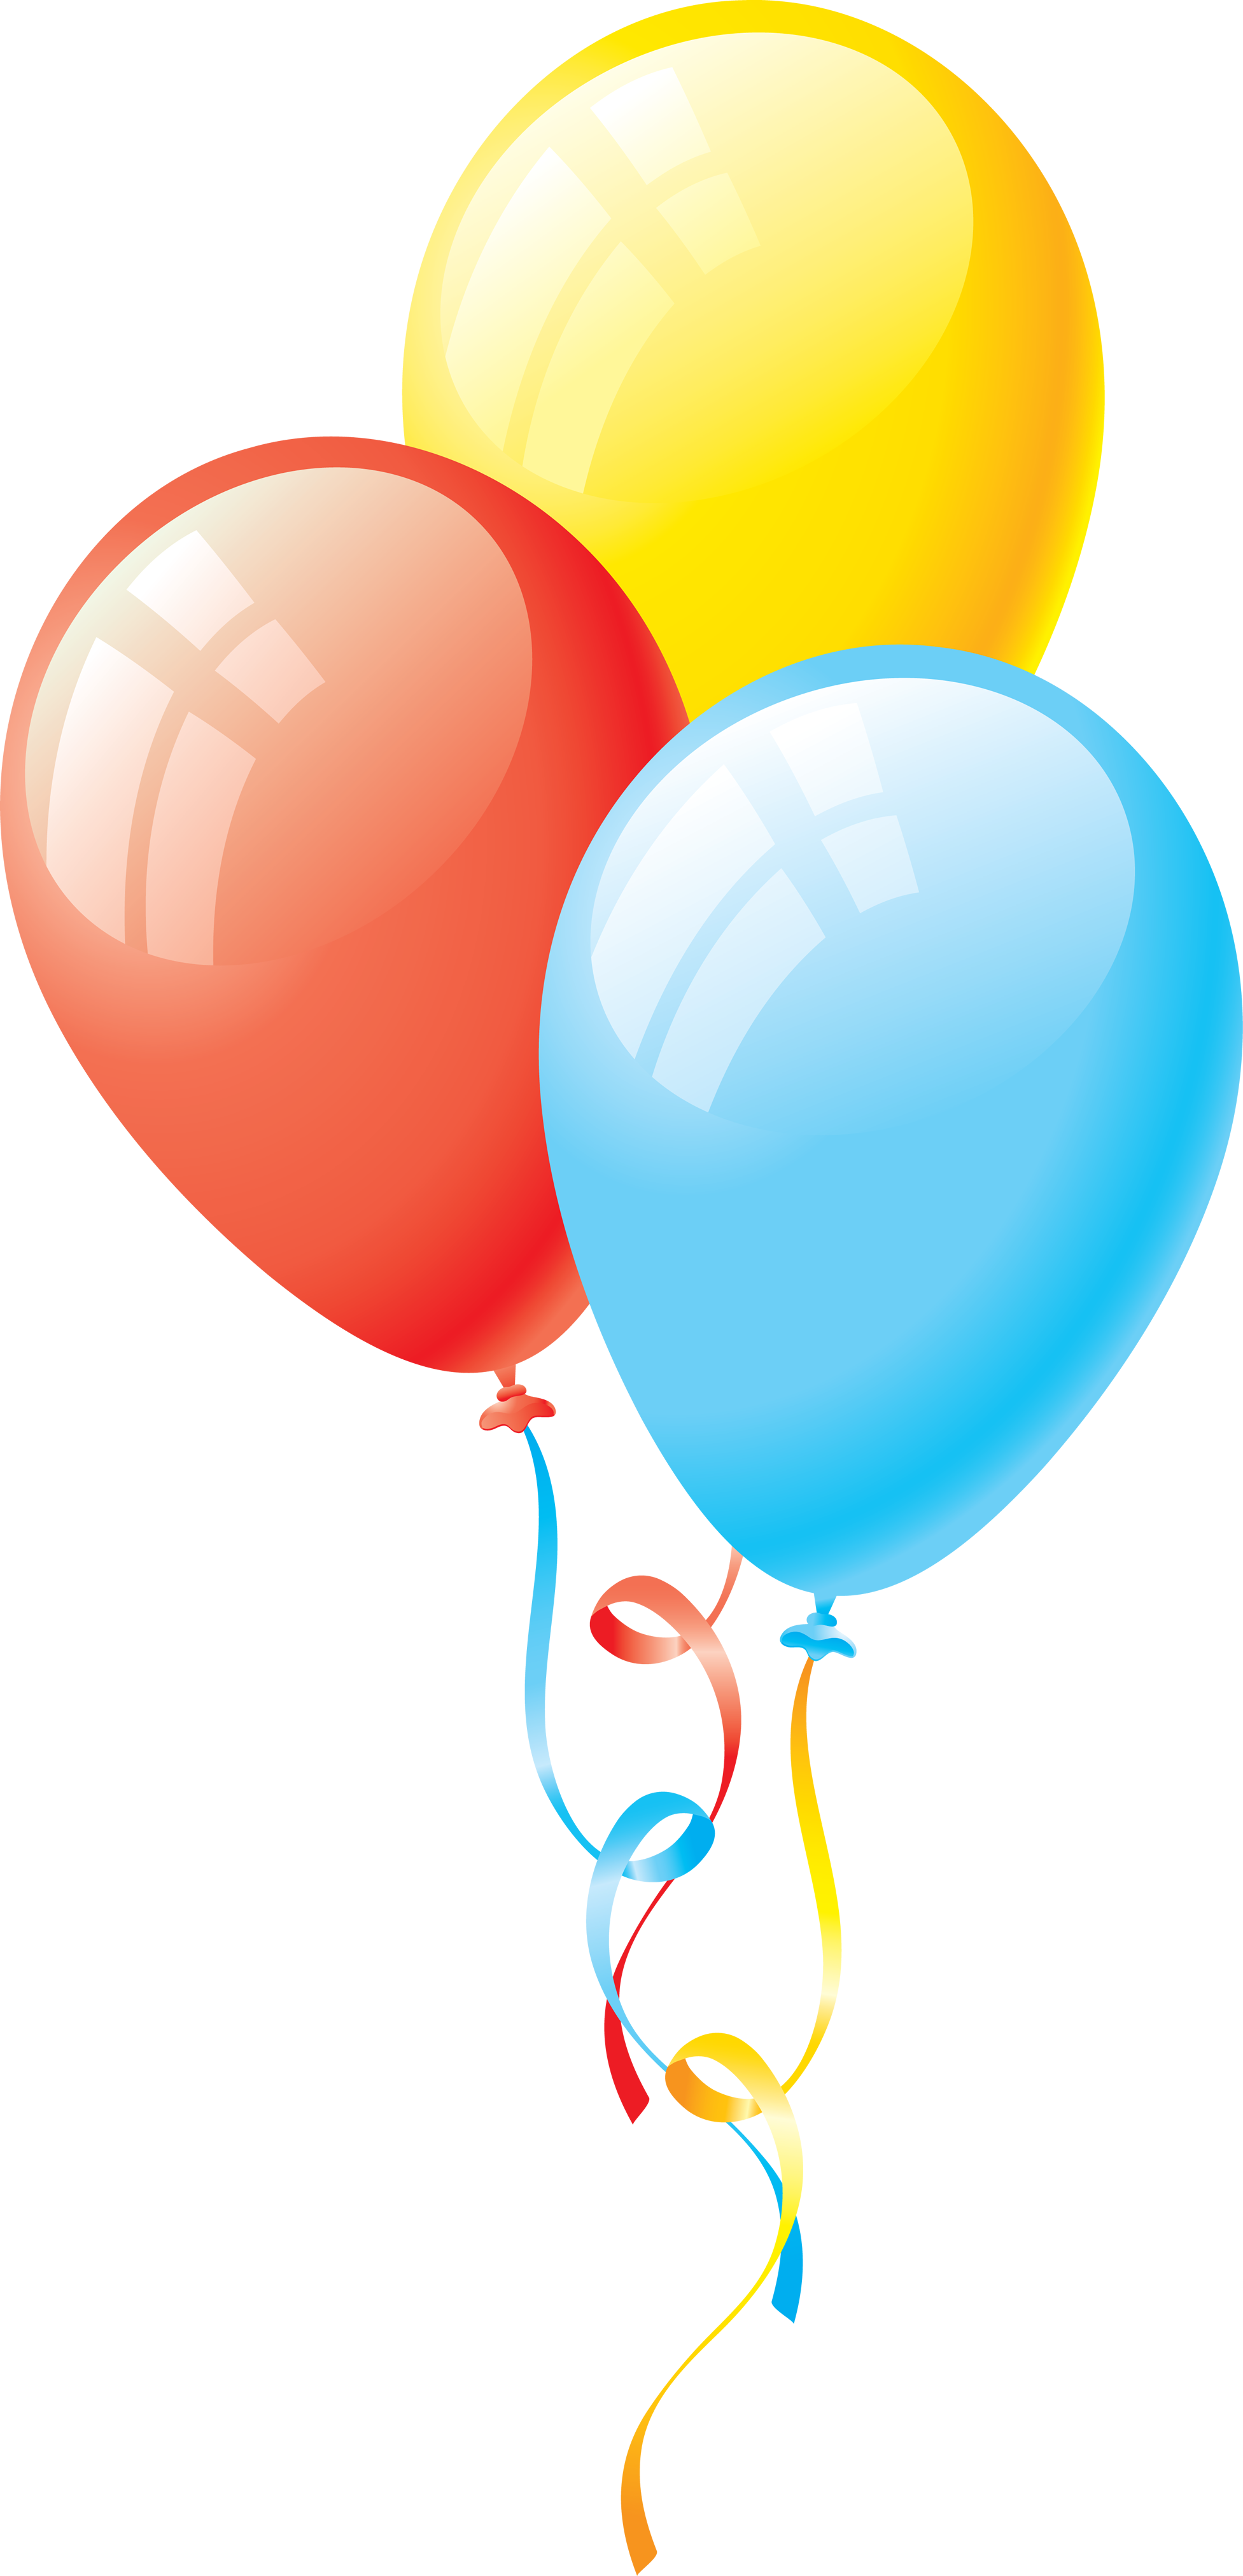 Colorful balloon PNG image, free download, balloons transparent image  download, size: 354x597px